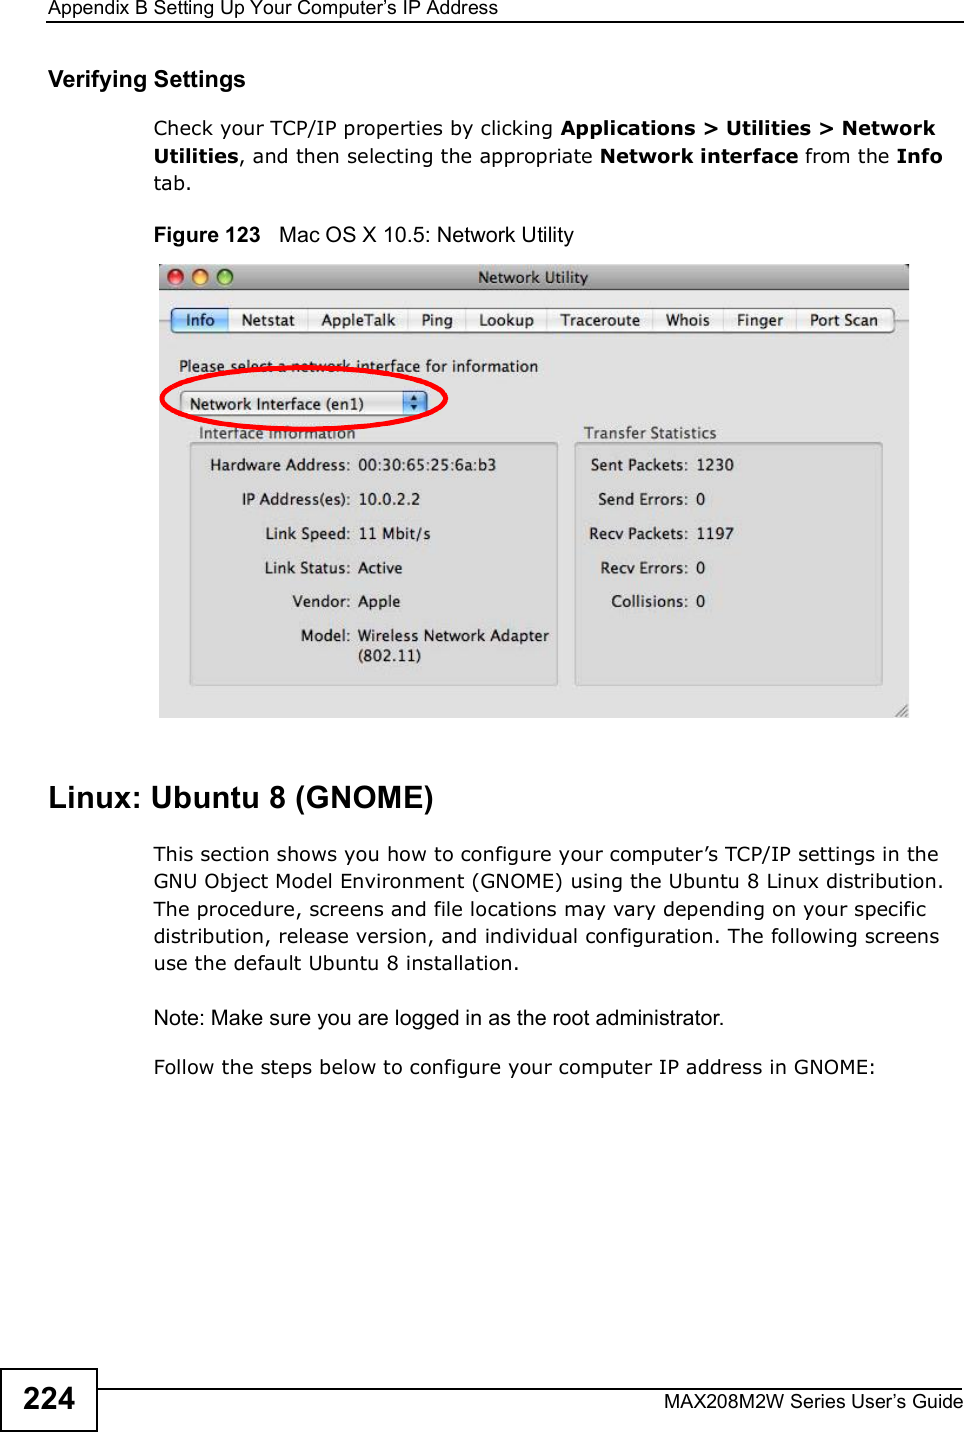 Appendix BSetting Up Your Computer s IP AddressMAX208M2W Series User s Guide224Verifying SettingsCheck your TCP/IP properties by clicking Applications &gt; Utilities &gt; Network Utilities, and then selecting the appropriate Network interface from the Info tab.Figure 123   Mac OS X 10.5: Network UtilityLinux: Ubuntu 8 (GNOME)This section shows you how to configure your computer s TCP/IP settings in the GNU Object Model Environment (GNOME) using the Ubuntu 8 Linux distribution. The procedure, screens and file locations may vary depending on your specific distribution, release version, and individual configuration. The following screens use the default Ubuntu 8 installation.Note: Make sure you are logged in as the root administrator. Follow the steps below to configure your computer IP address in GNOME: 